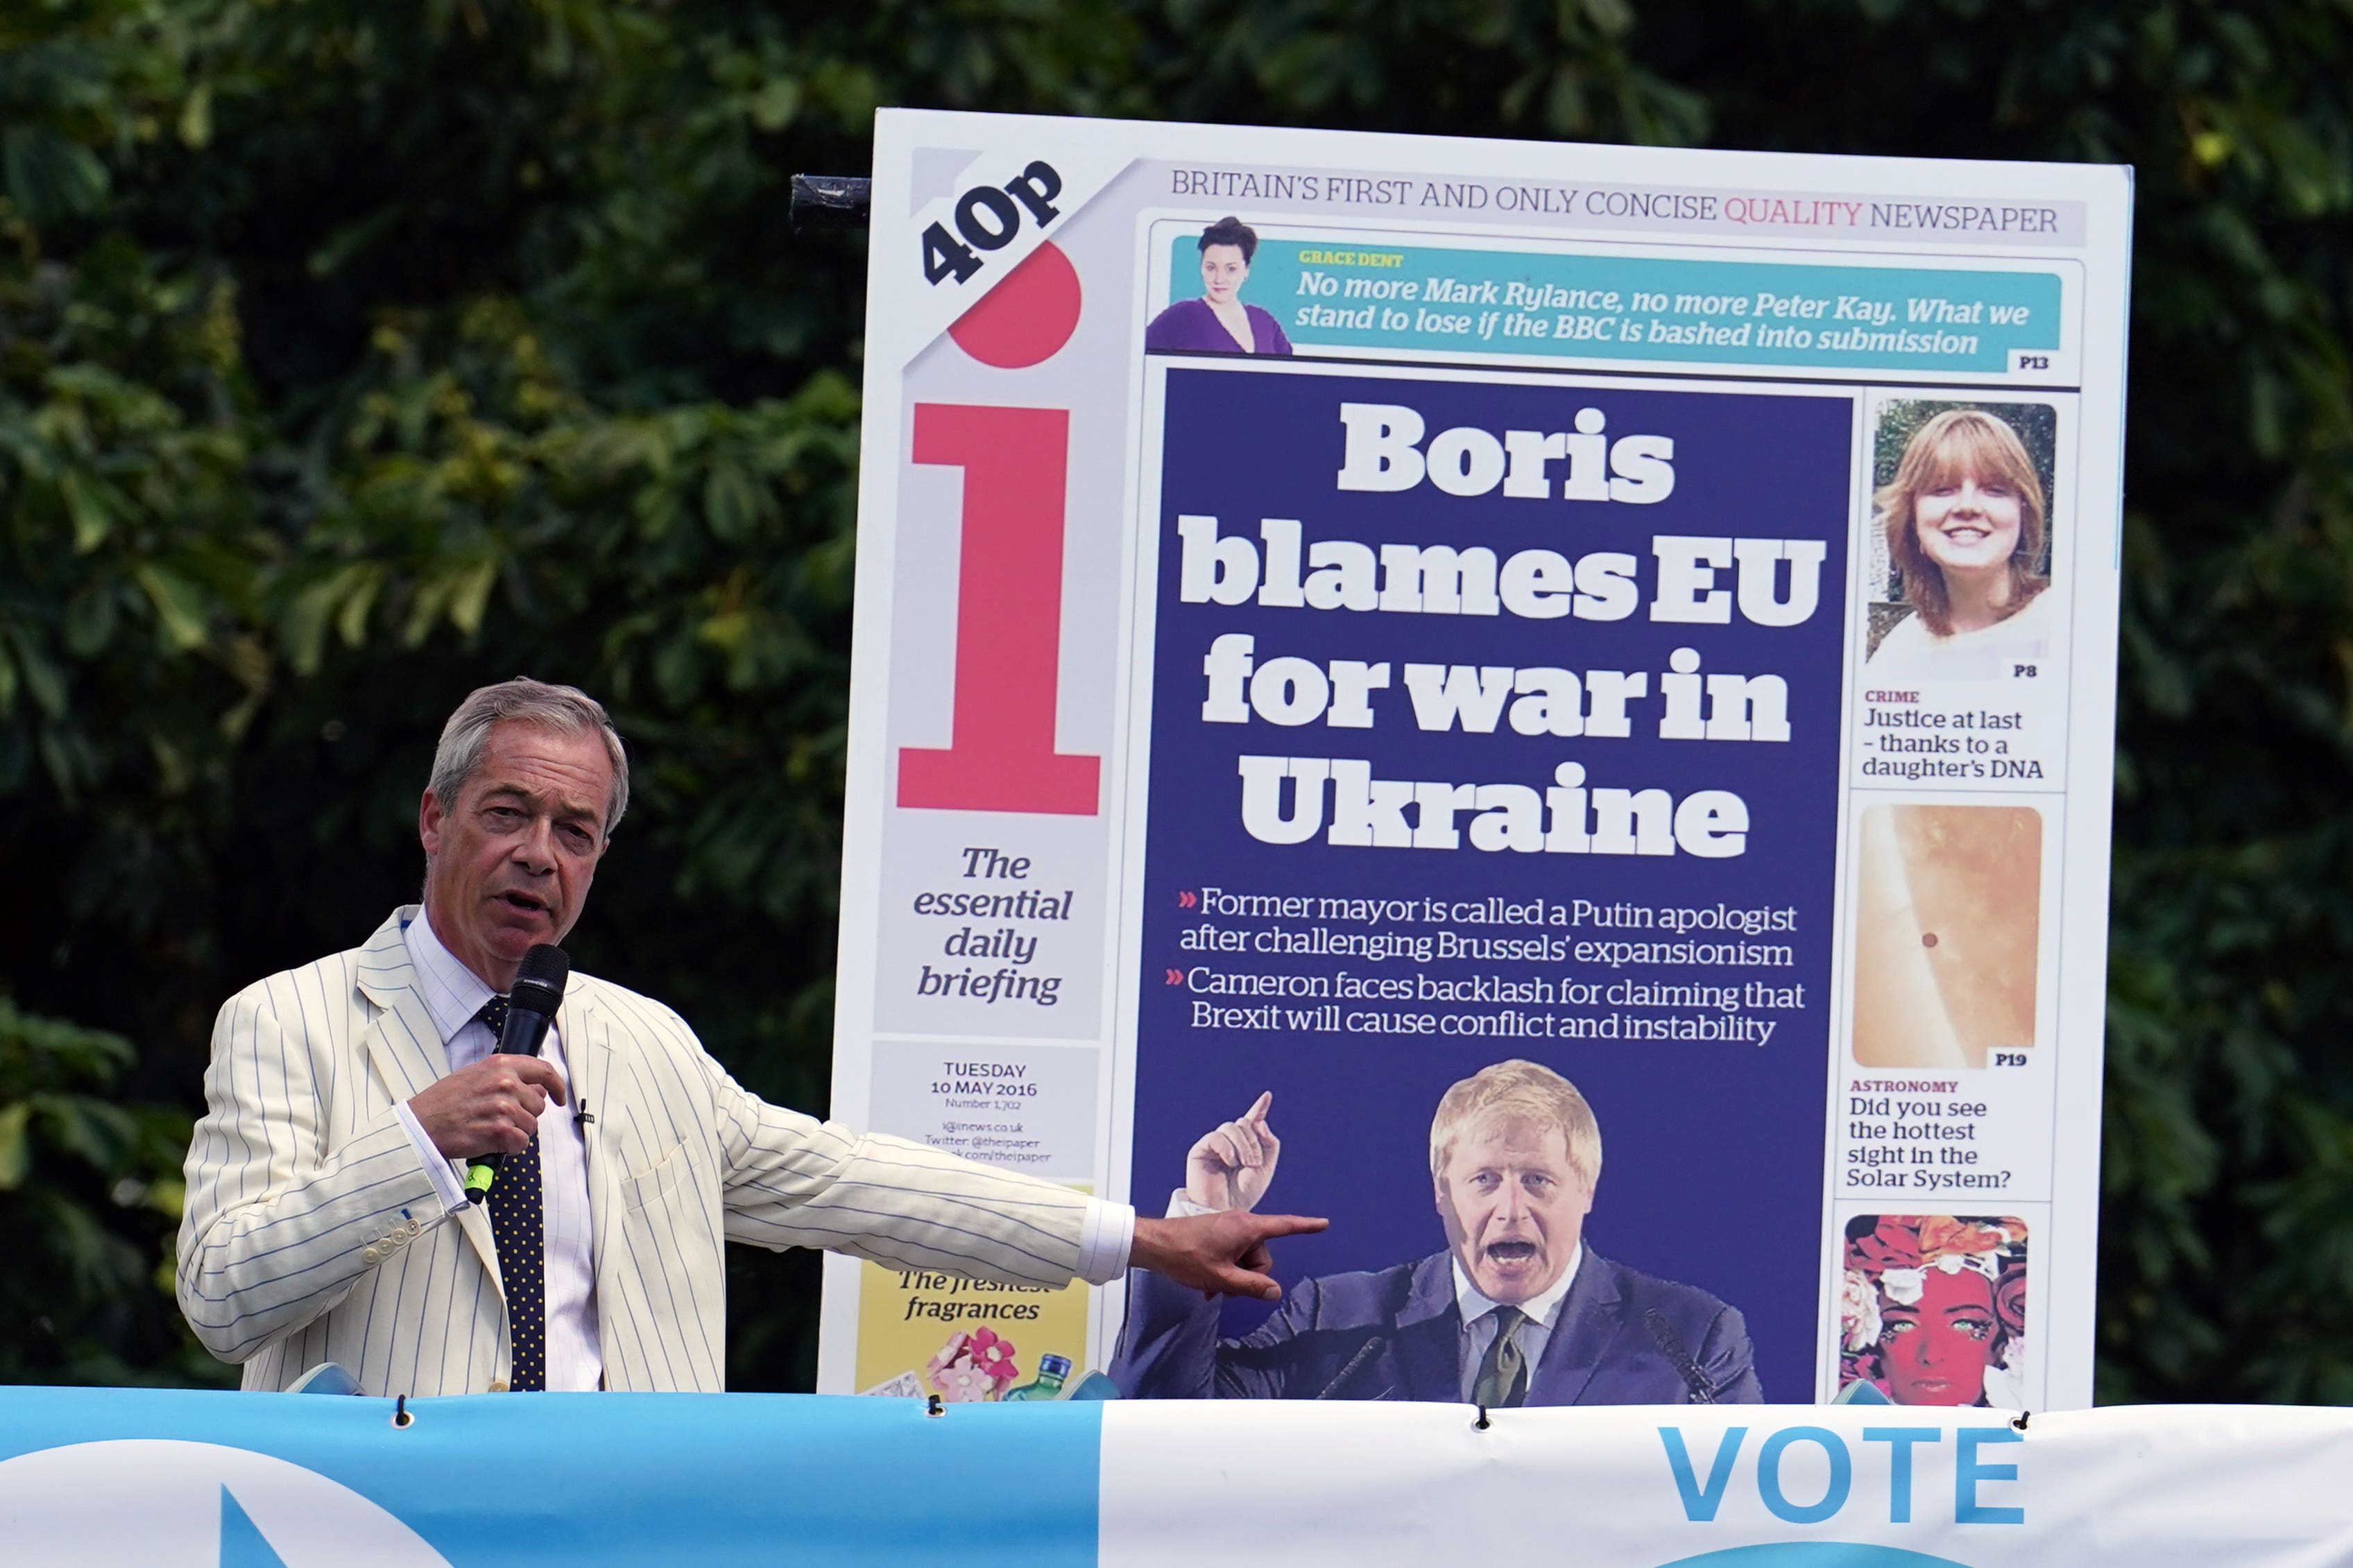 Reform UK leader Nigel Farage said he would ‘never, ever defend’ Vladimir Putin, as he ramped up his row with Boris Johnson